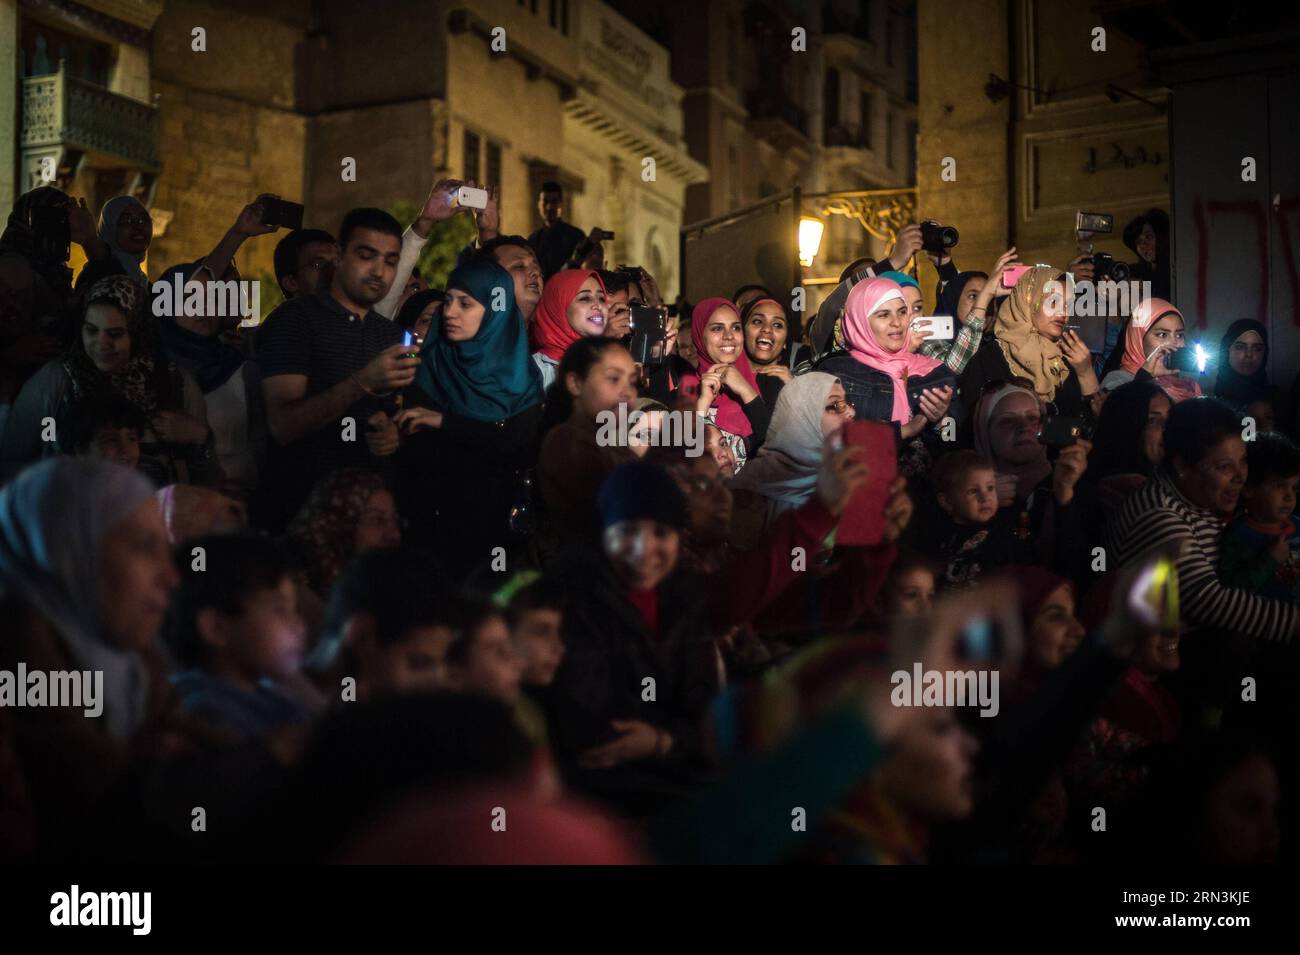 (150421) -- CAIRO, April 21, 2015 -- Audience reacts during an open-air show for World Heritage Day in the old town of Cairo, Egypt, on April 18, 2015. Puppetry has a long history in Egypt, which could be dated back to the Pharaonic times. Egyptians began to manufacture Marionette dolls for entertainment in the 1960 s, when they established the National Puppet Theatre in capital Cairo. Due to social turmoil, entertainments seem rare and precious for Egyptian people. Meanwhile the fading industry of puppetry is challenged by mass media, internet and mobile phones and gradually lost popularity i Stock Photo